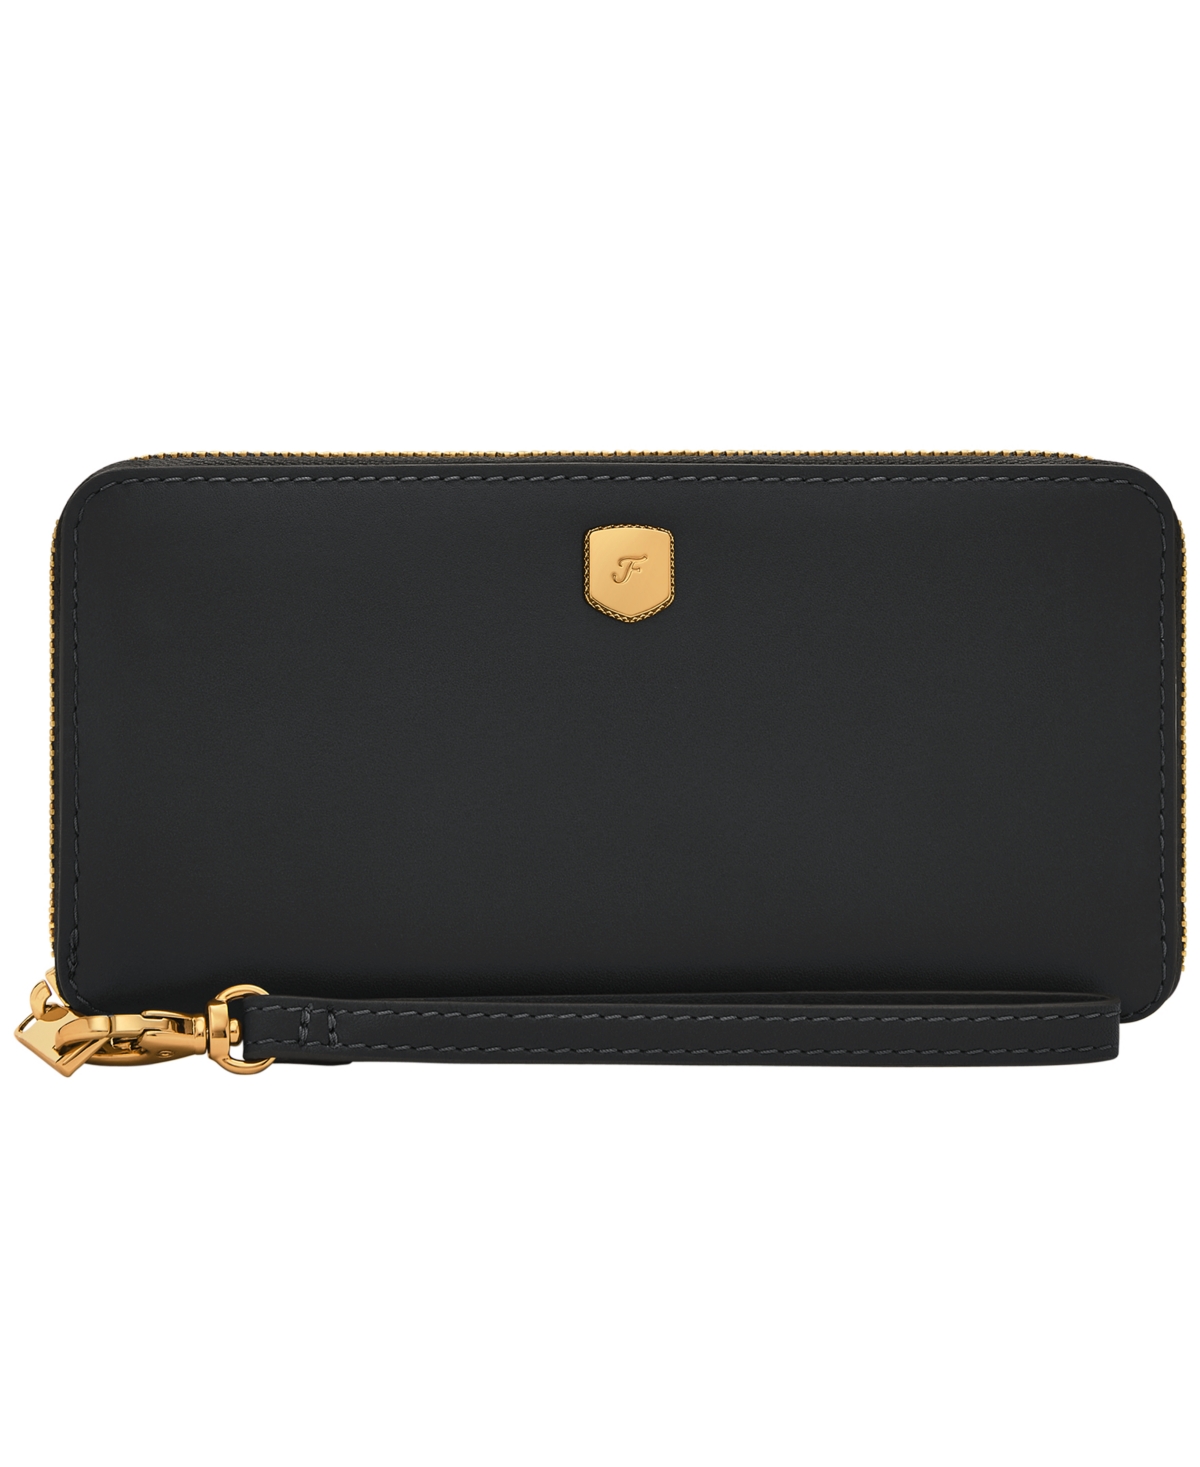 Fossil Lennox Zip Continental Wallet In Black